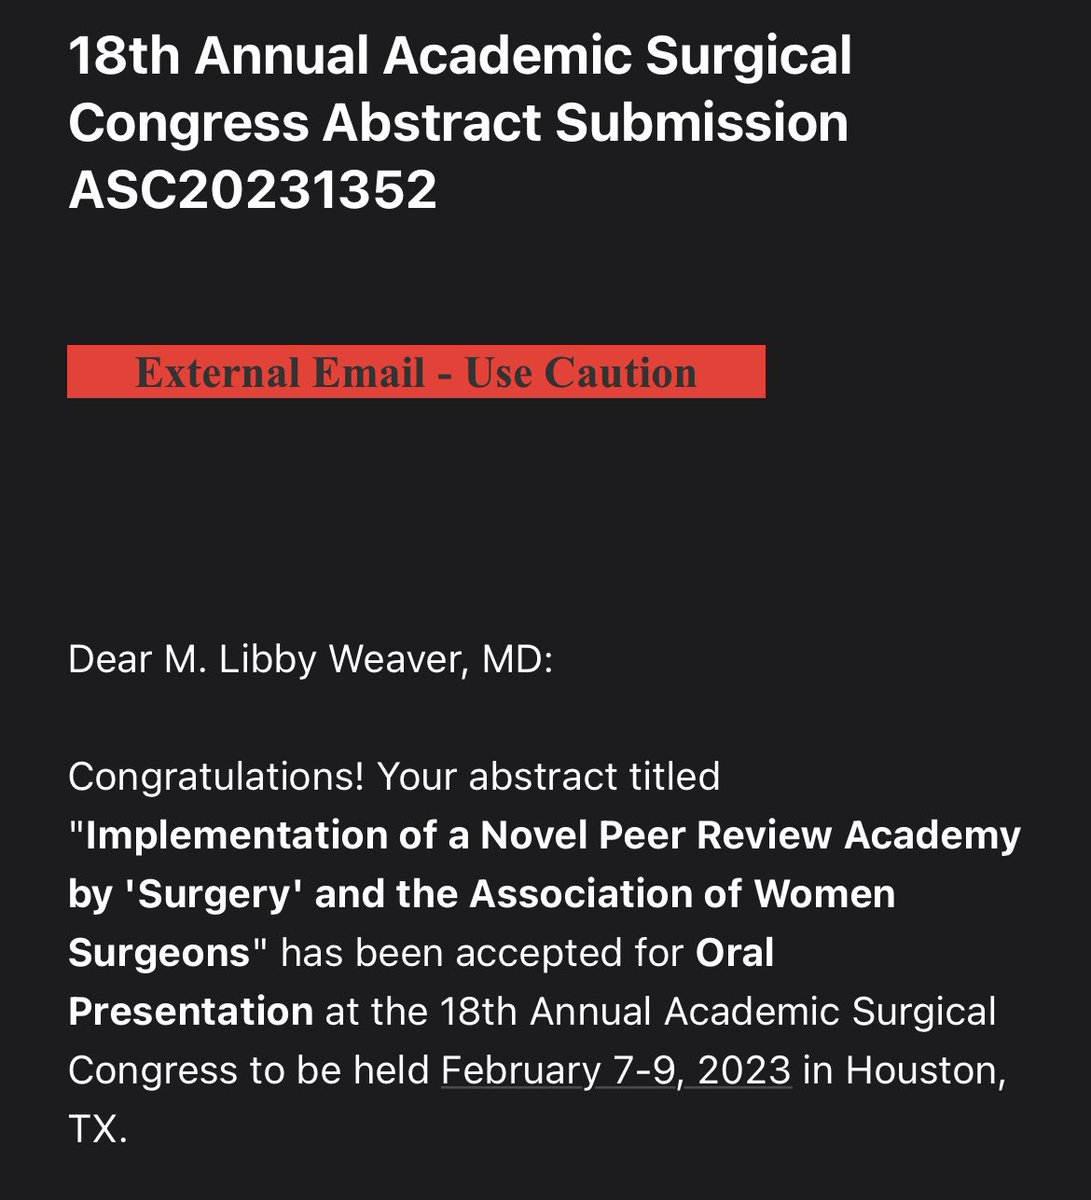 In case you didn’t realize how awesome the @WomenSurgeons @SurgJournal #ReviewerAcademy really is, our abstract describing the inaugural year outcomes will be presented at #ASC2023! @AeroMD @YanaEtkin @rebeccamarmor @lisacannada @LeahTatebe @altierim1 @KDTinyDr @JenniferPlichta